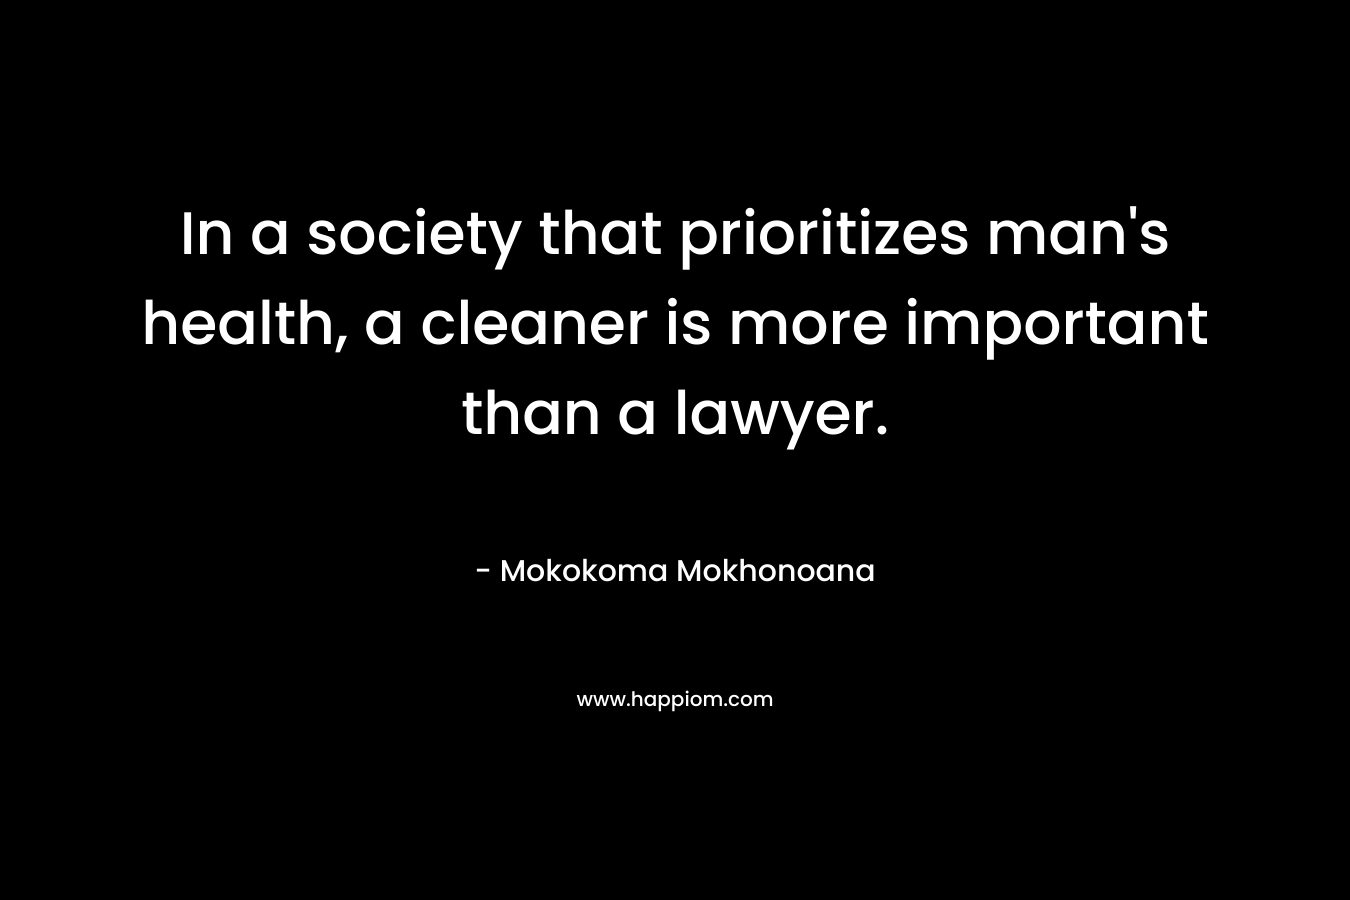 In a society that prioritizes man's health, a cleaner is more important than a lawyer.